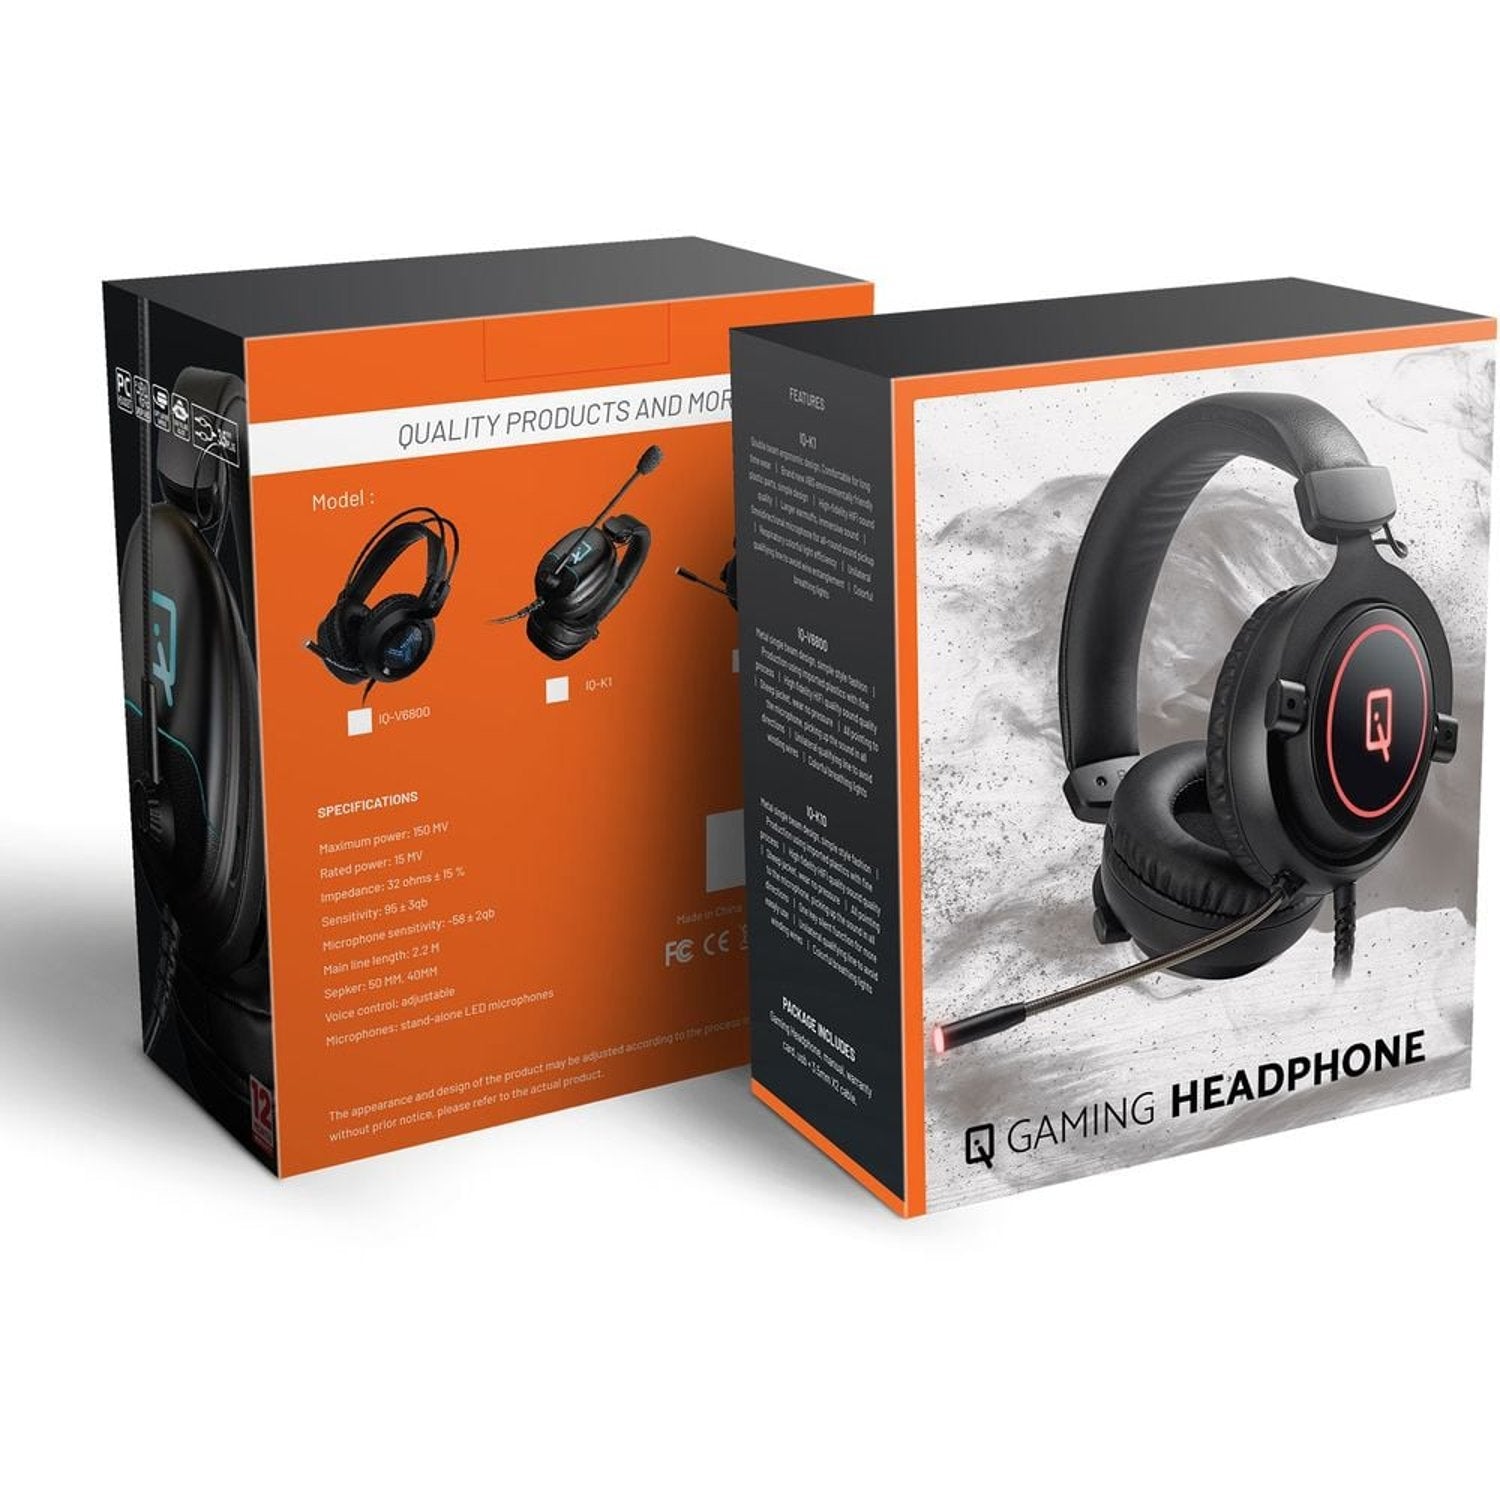 IQ K10 Wired Gaming Headset Stereo Bass Surround Sound Noise Cancelling Over Ear Headphones with Mic